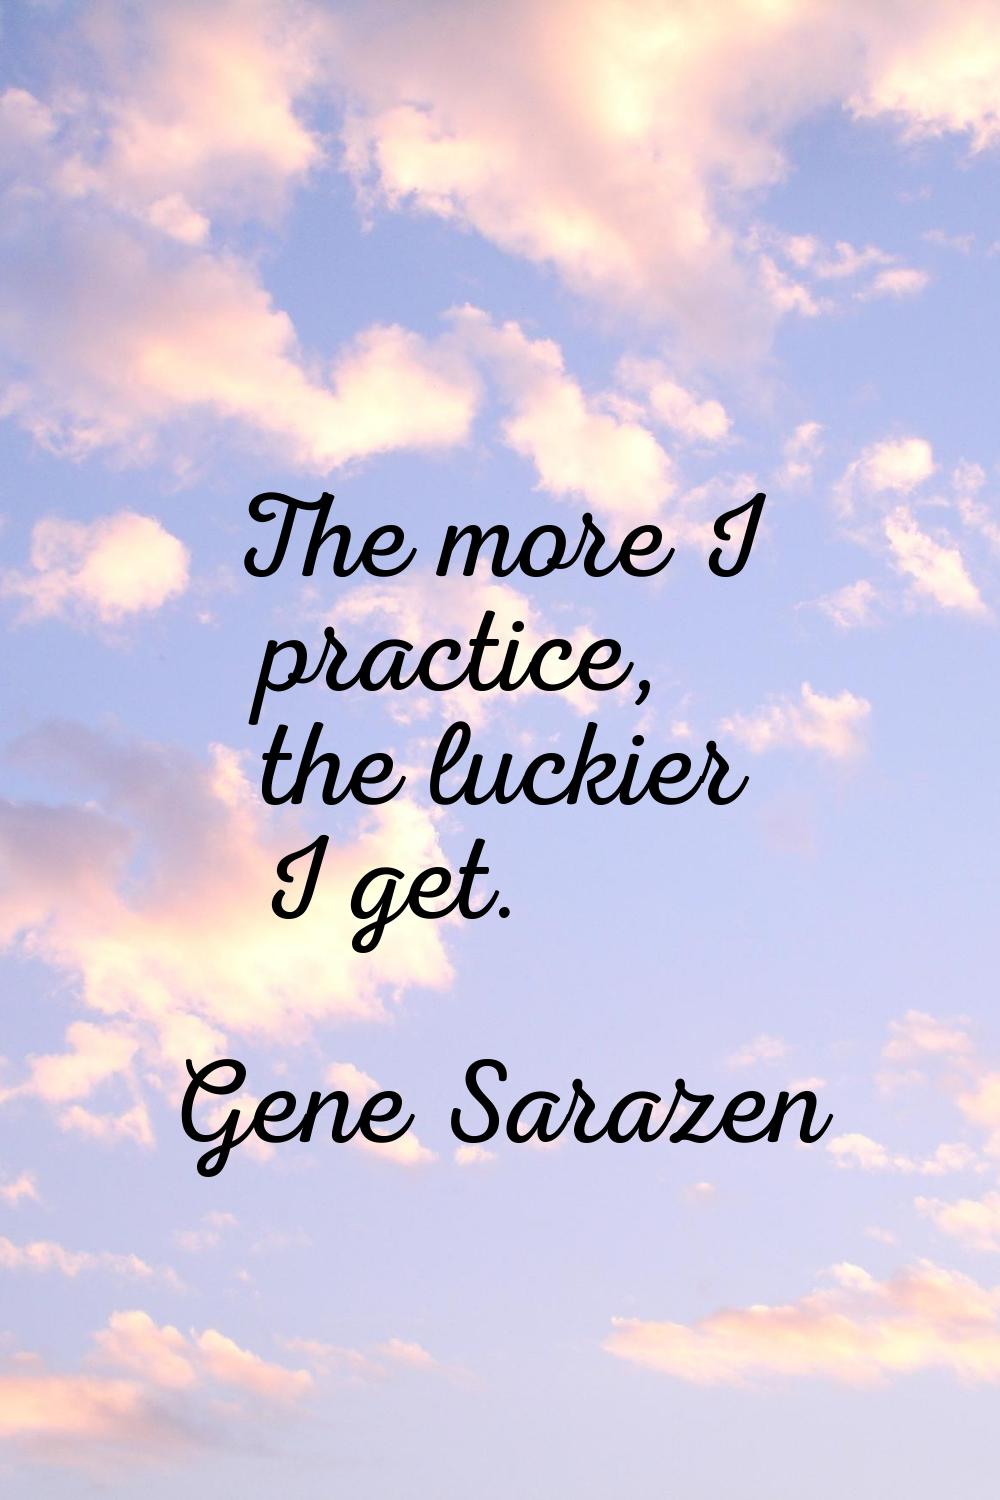 The more I practice, the luckier I get.